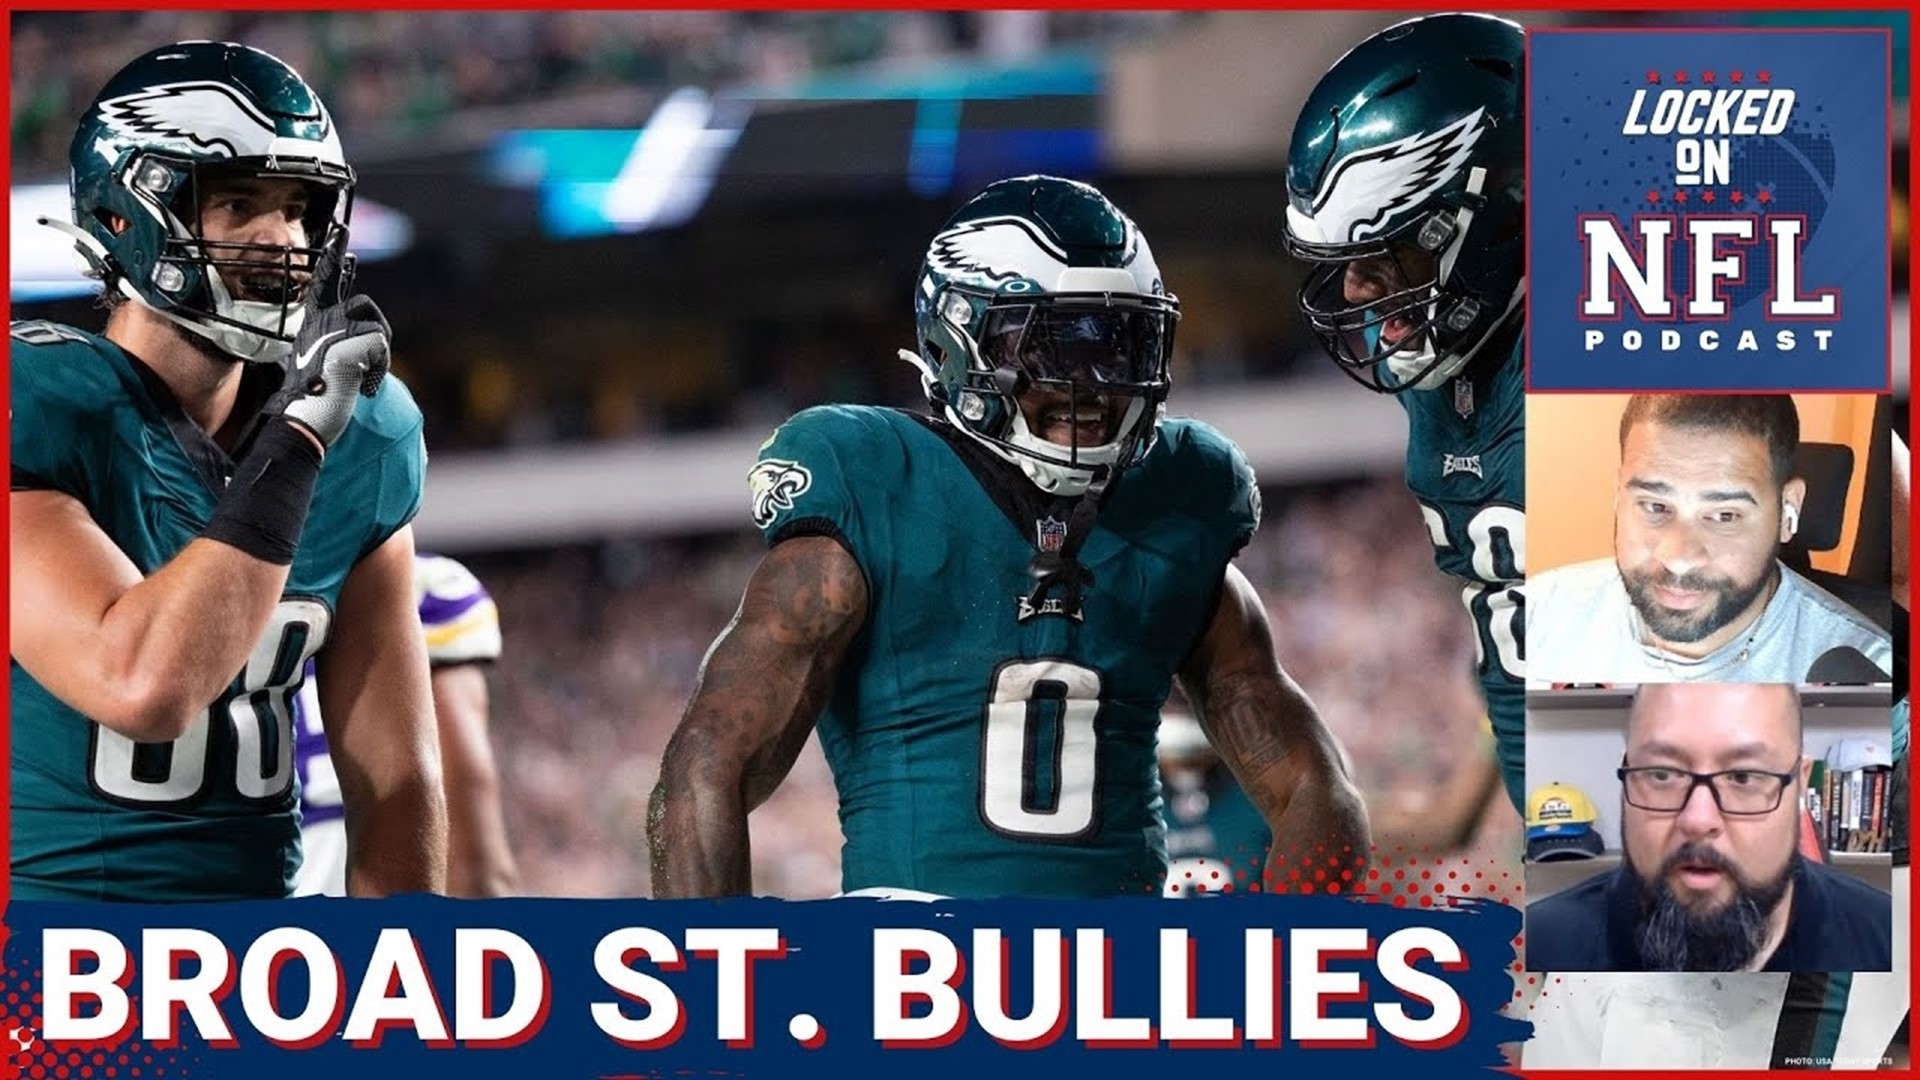 The Philadelphia Eagles dominated the line of scrimmage on both sides of the ball against the Minnesota Vikings in their 34-28 Thursday night football win.